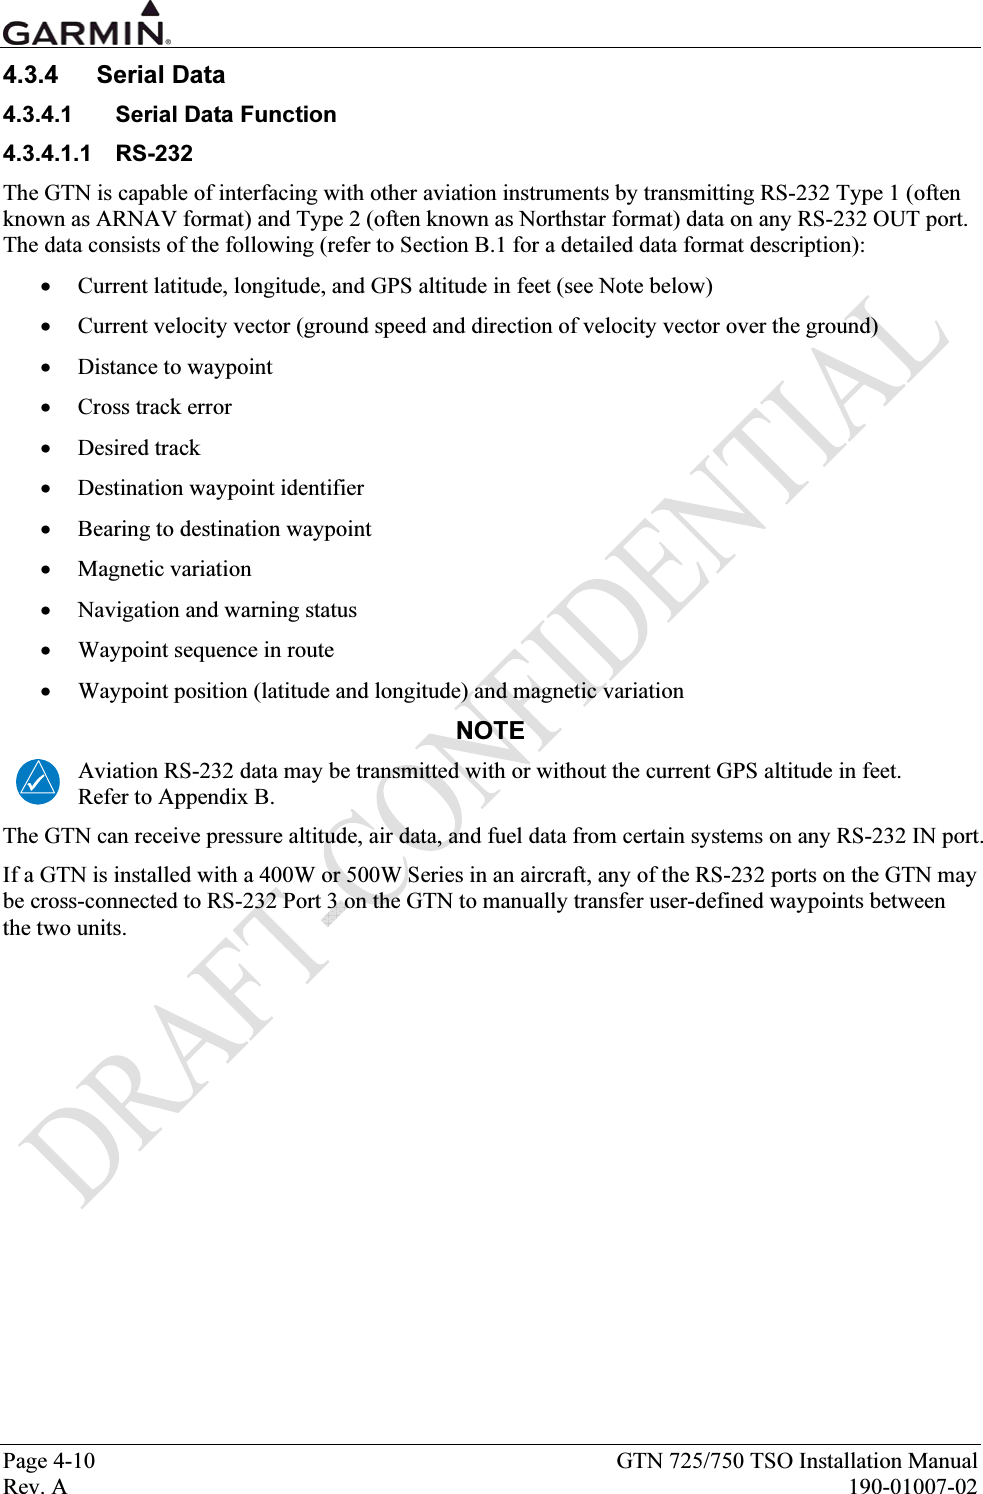  Page 4-10  GTN 725/750 TSO Installation Manual Rev. A  190-01007-02 4.3.4 Serial Data 4.3.4.1 Serial Data Function 4.3.4.1.1 RS-232 The GTN is capable of interfacing with other aviation instruments by transmitting RS-232 Type 1 (often known as ARNAV format) and Type 2 (often known as Northstar format) data on any RS-232 OUT port.  The data consists of the following (refer to Section B.1 for a detailed data format description): • Current latitude, longitude, and GPS altitude in feet (see Note below) • Current velocity vector (ground speed and direction of velocity vector over the ground) • Distance to waypoint • Cross track error • Desired track • Destination waypoint identifier • Bearing to destination waypoint • Magnetic variation • Navigation and warning status • Waypoint sequence in route • Waypoint position (latitude and longitude) and magnetic variation NOTE Aviation RS-232 data may be transmitted with or without the current GPS altitude in feet.  Refer to Appendix B. The GTN can receive pressure altitude, air data, and fuel data from certain systems on any RS-232 IN port. If a GTN is installed with a 400W or 500W Series in an aircraft, any of the RS-232 ports on the GTN may be cross-connected to RS-232 Port 3 on the GTN to manually transfer user-defined waypoints between the two units. 